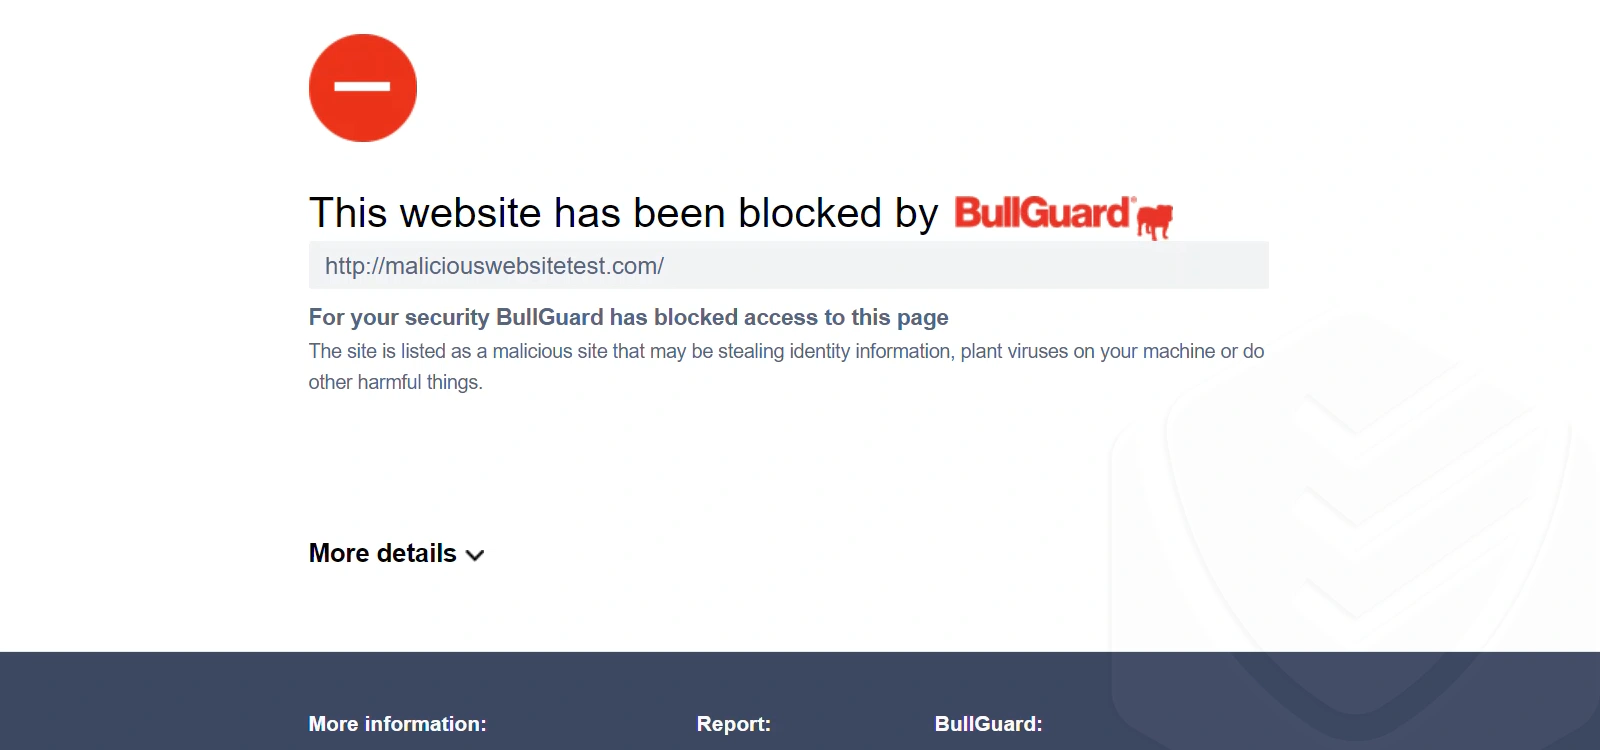 BullGuard prevented a website from opening